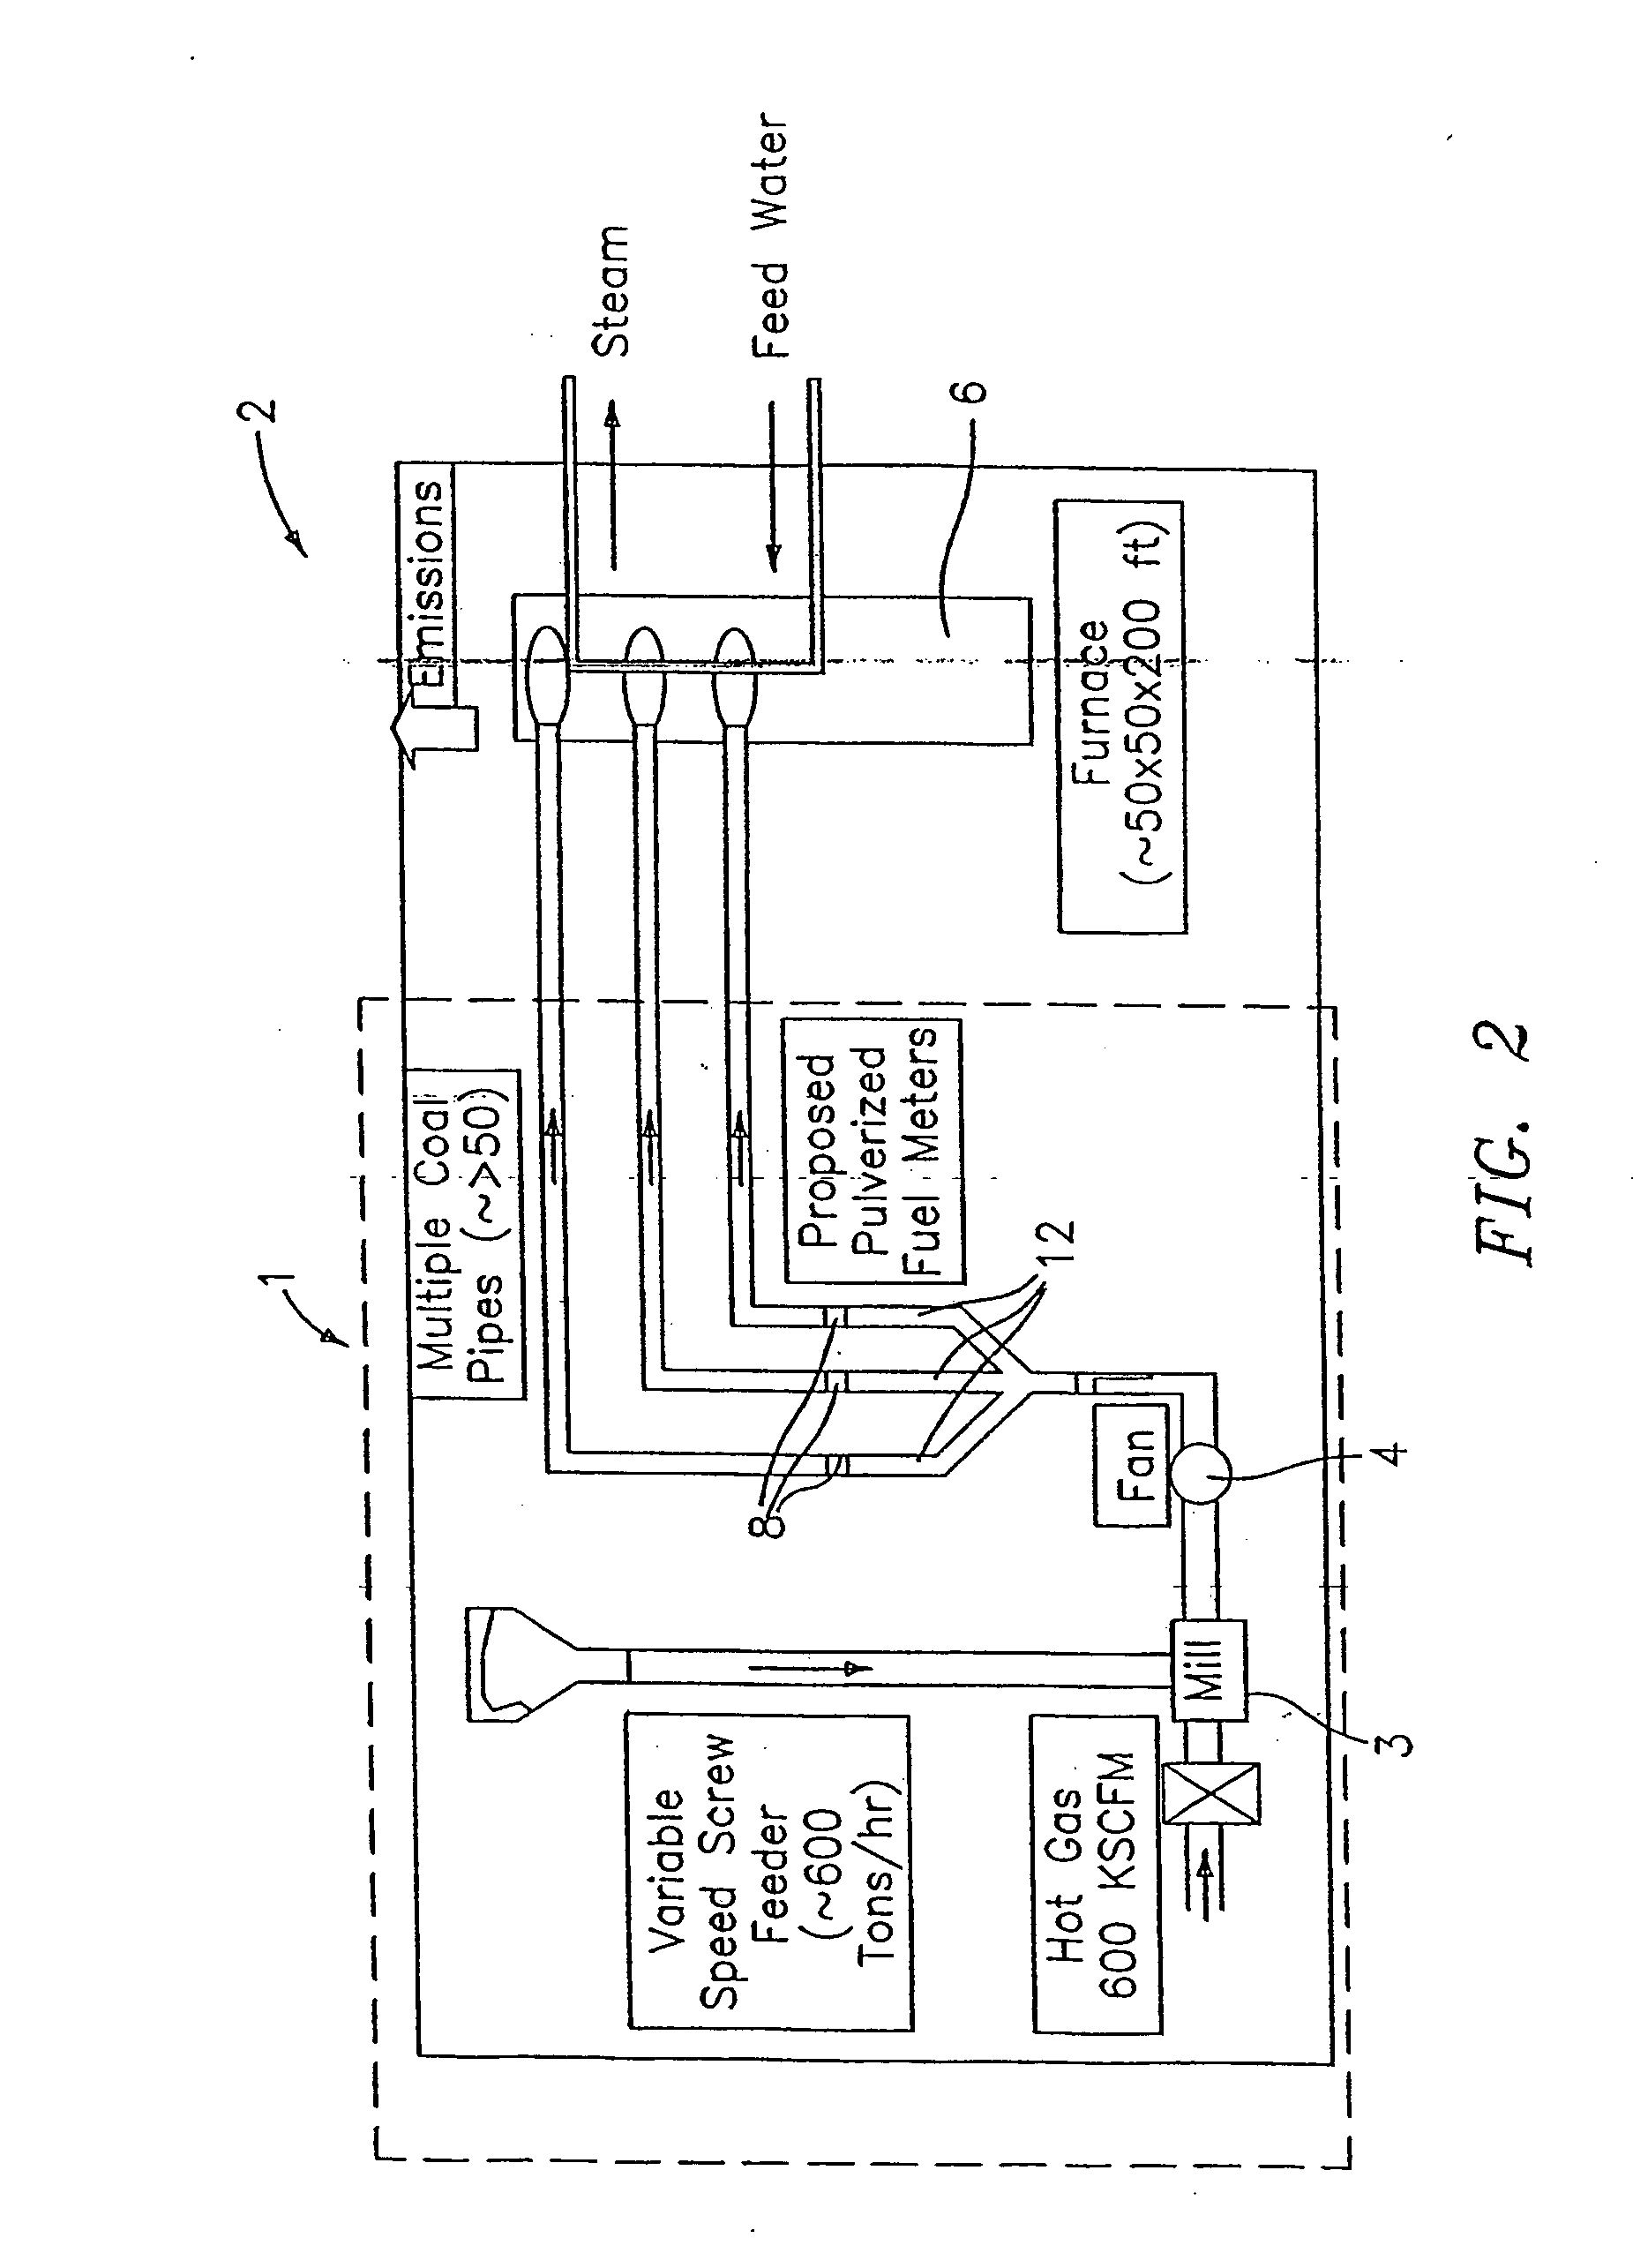 Apparatus and method for measuring parameters of a mixture having solid particles suspended in a fluid flowing in a pipe